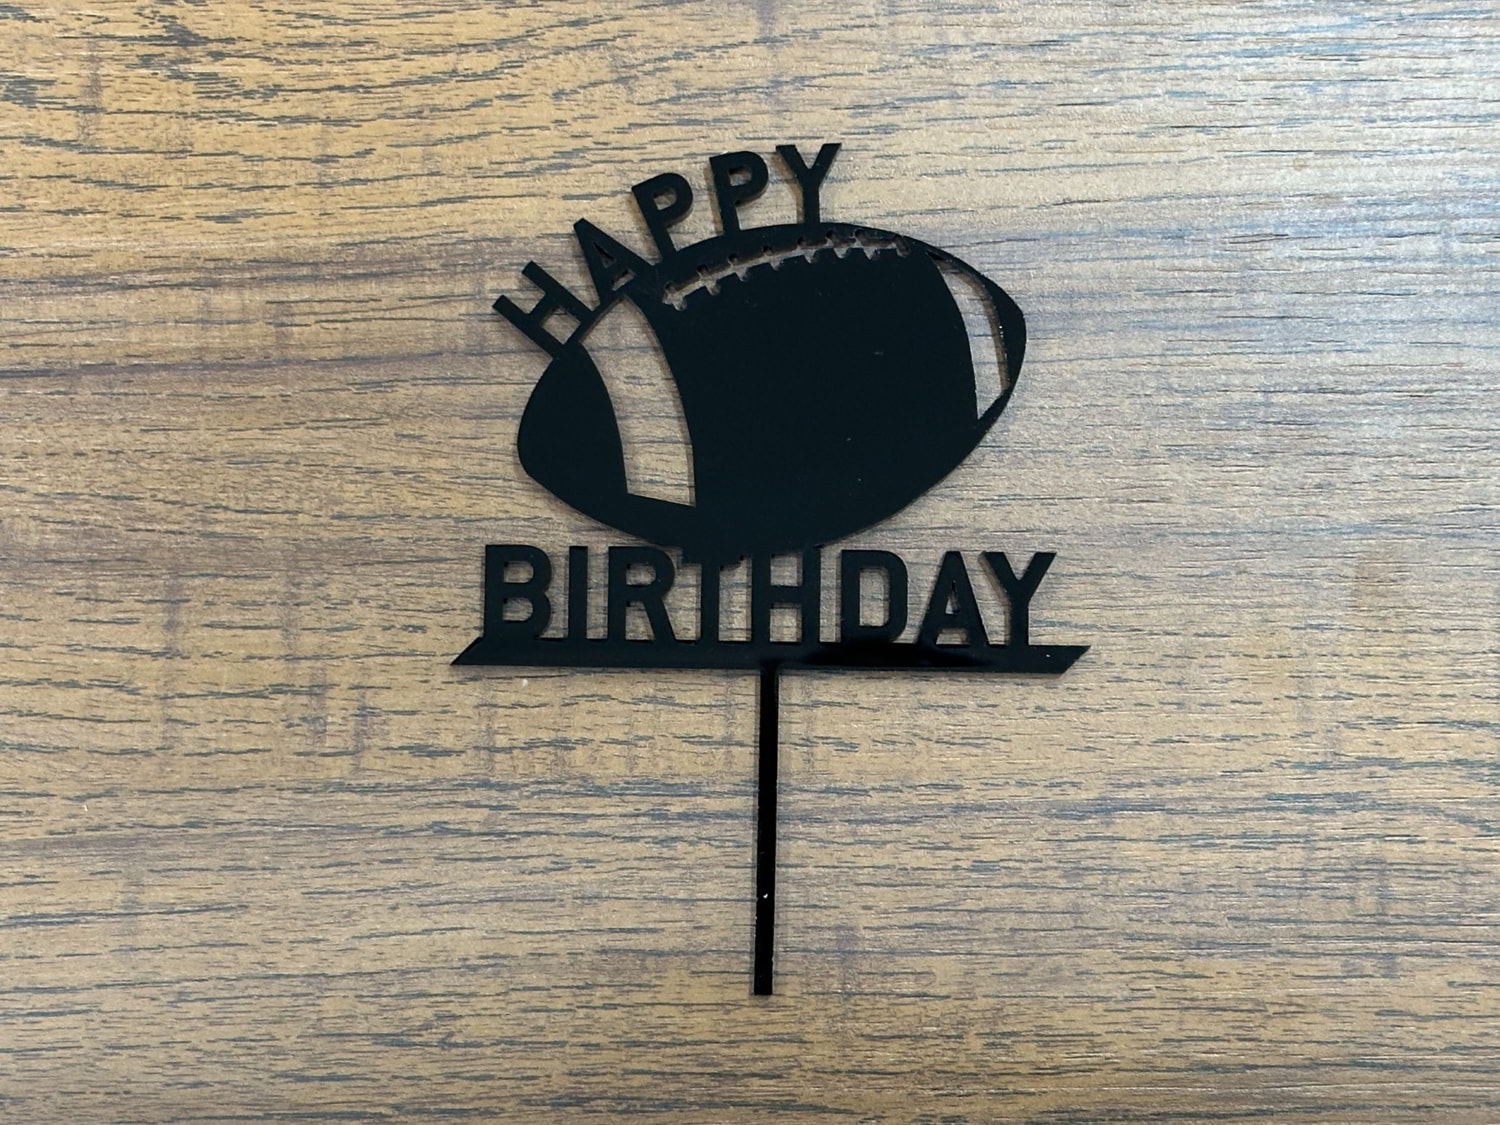 Laser Cut Rugby Ball Happy Birthday Cake Topper Free Vector